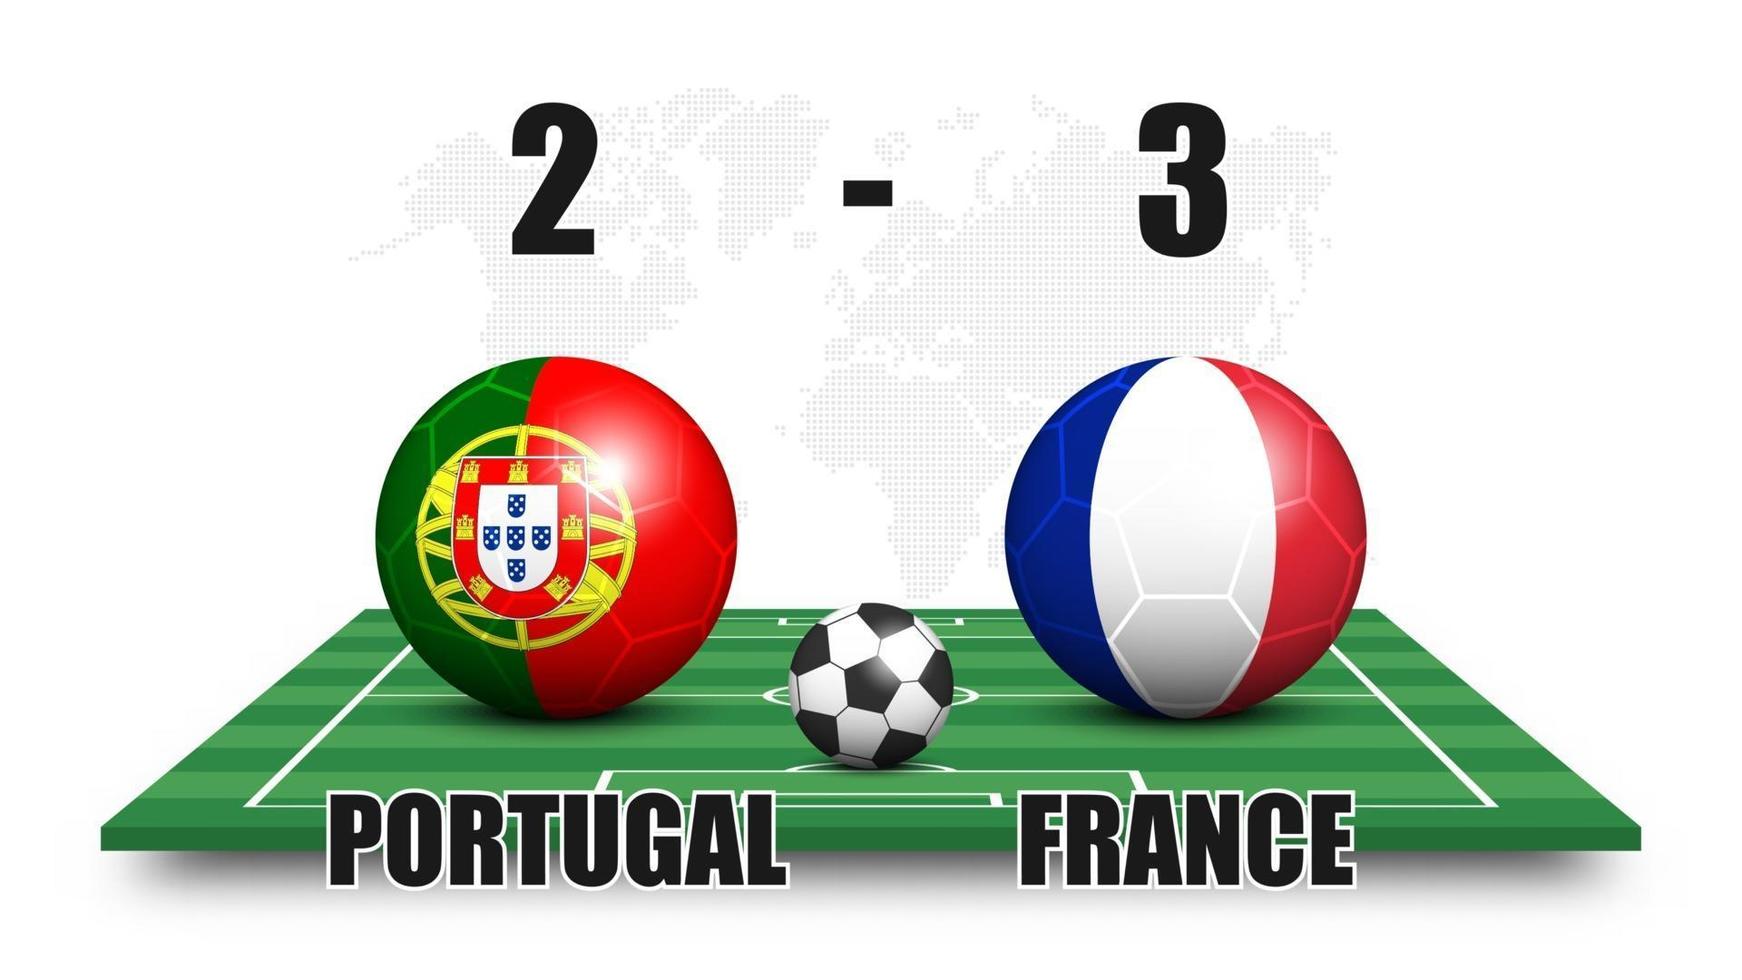 Portugal vs France . Soccer ball with national flag pattern on perspective football field . Dotted world map background . Football match result and scoreboard . Sport cup tournament . 3D vector design